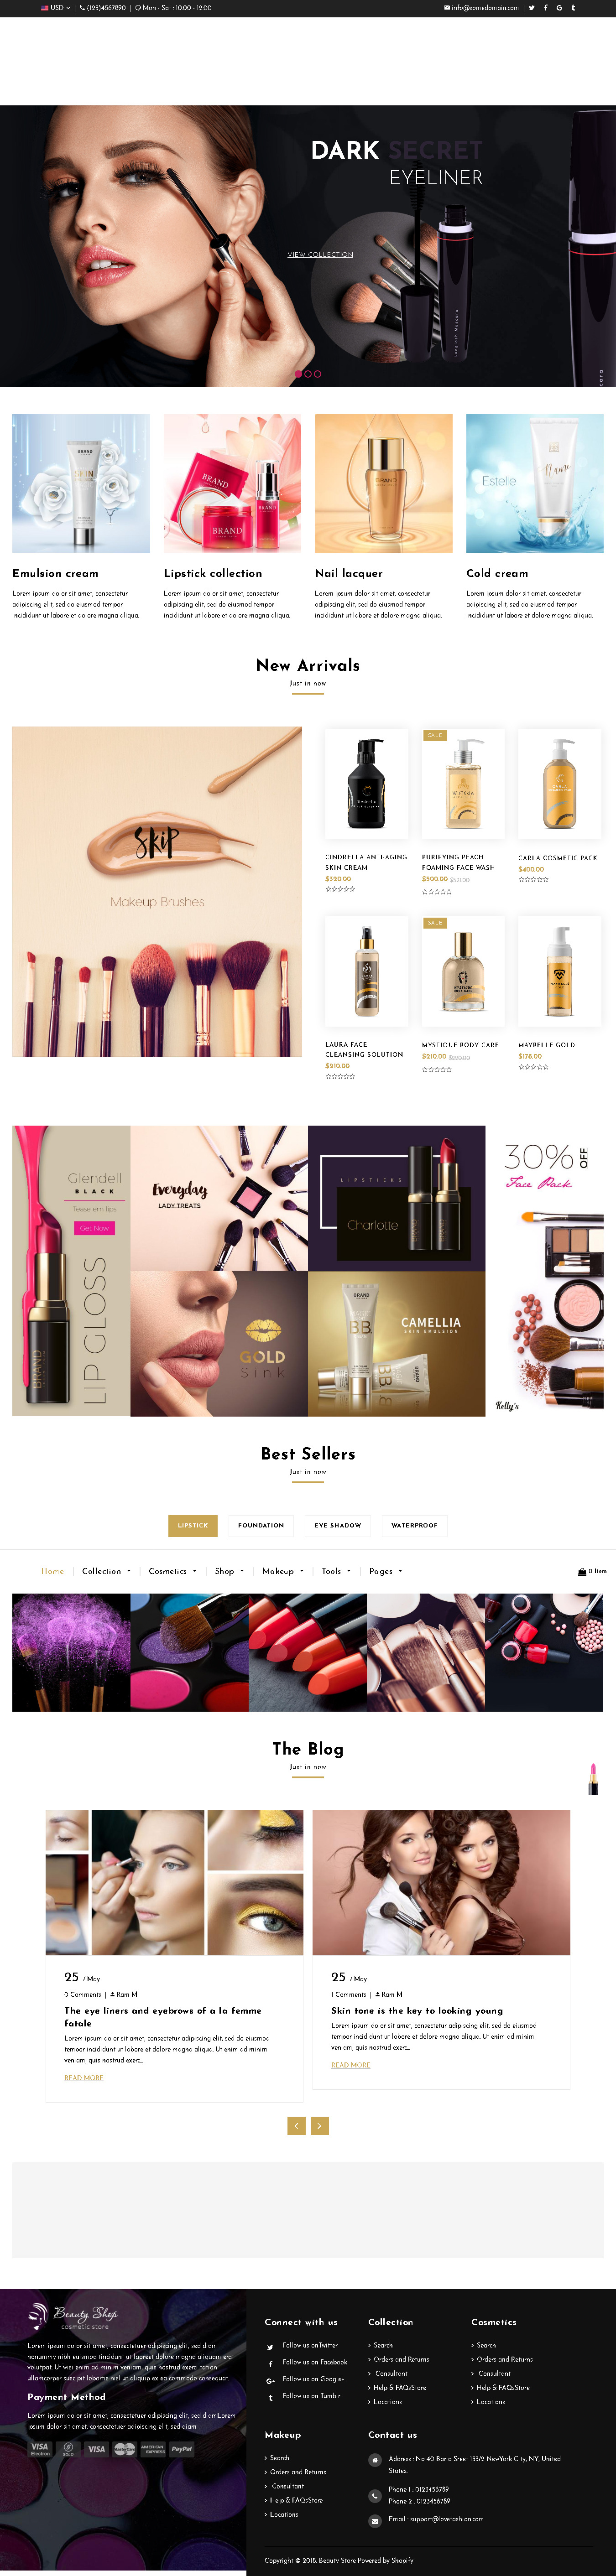 Best Shopify themes for Cosmetics store - Beauty – Cosmetics and Fashion Beauty Shopify Theme